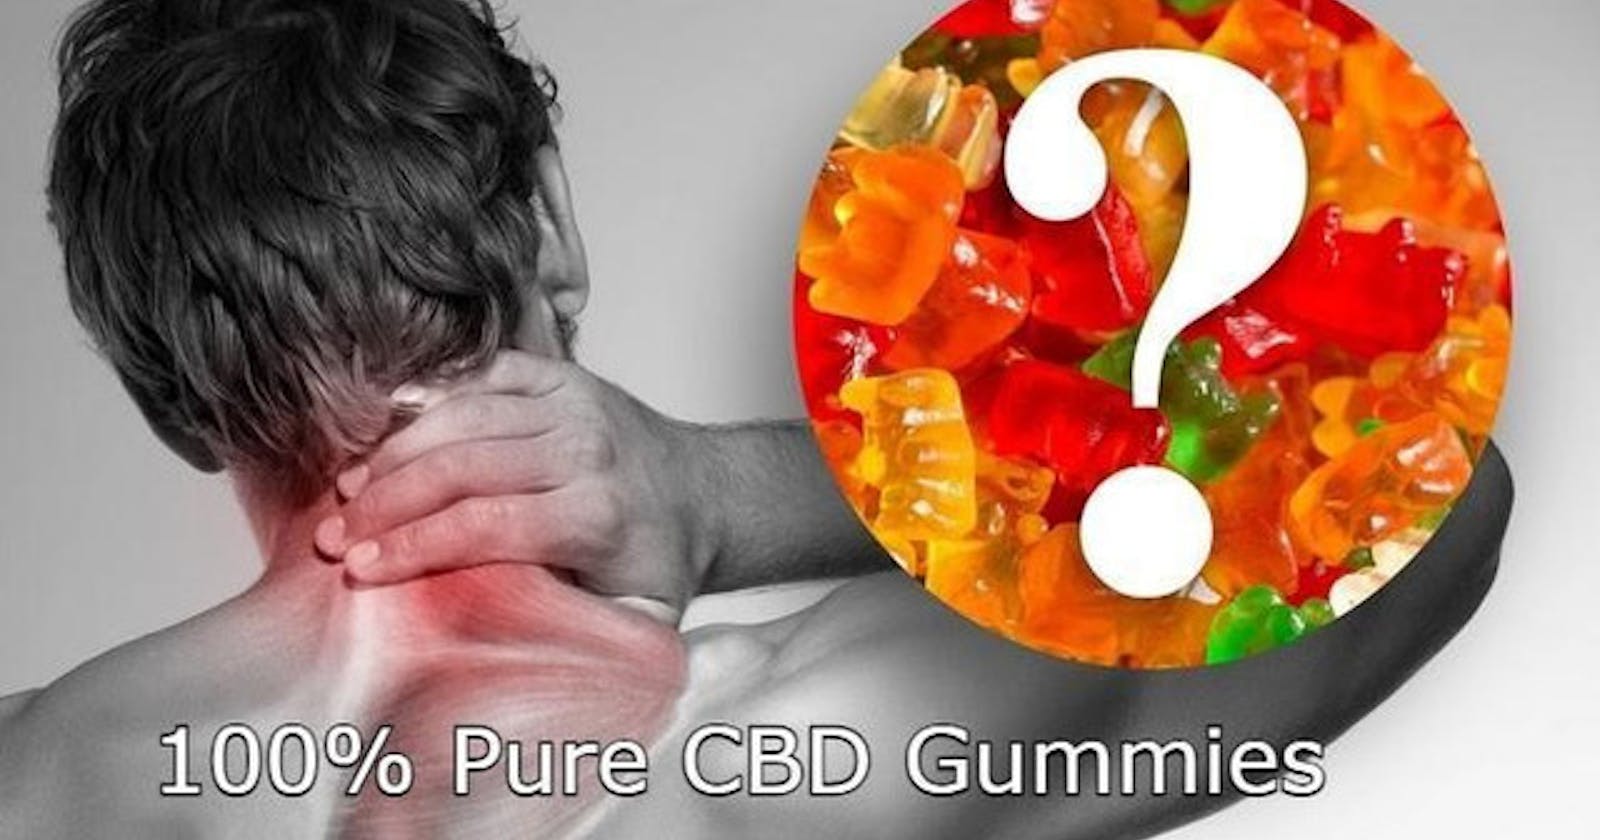 Dolly Parton CBD Gummies Reviews (USA): Is It Legitimate Or Scammer? Shocking Ingredients?